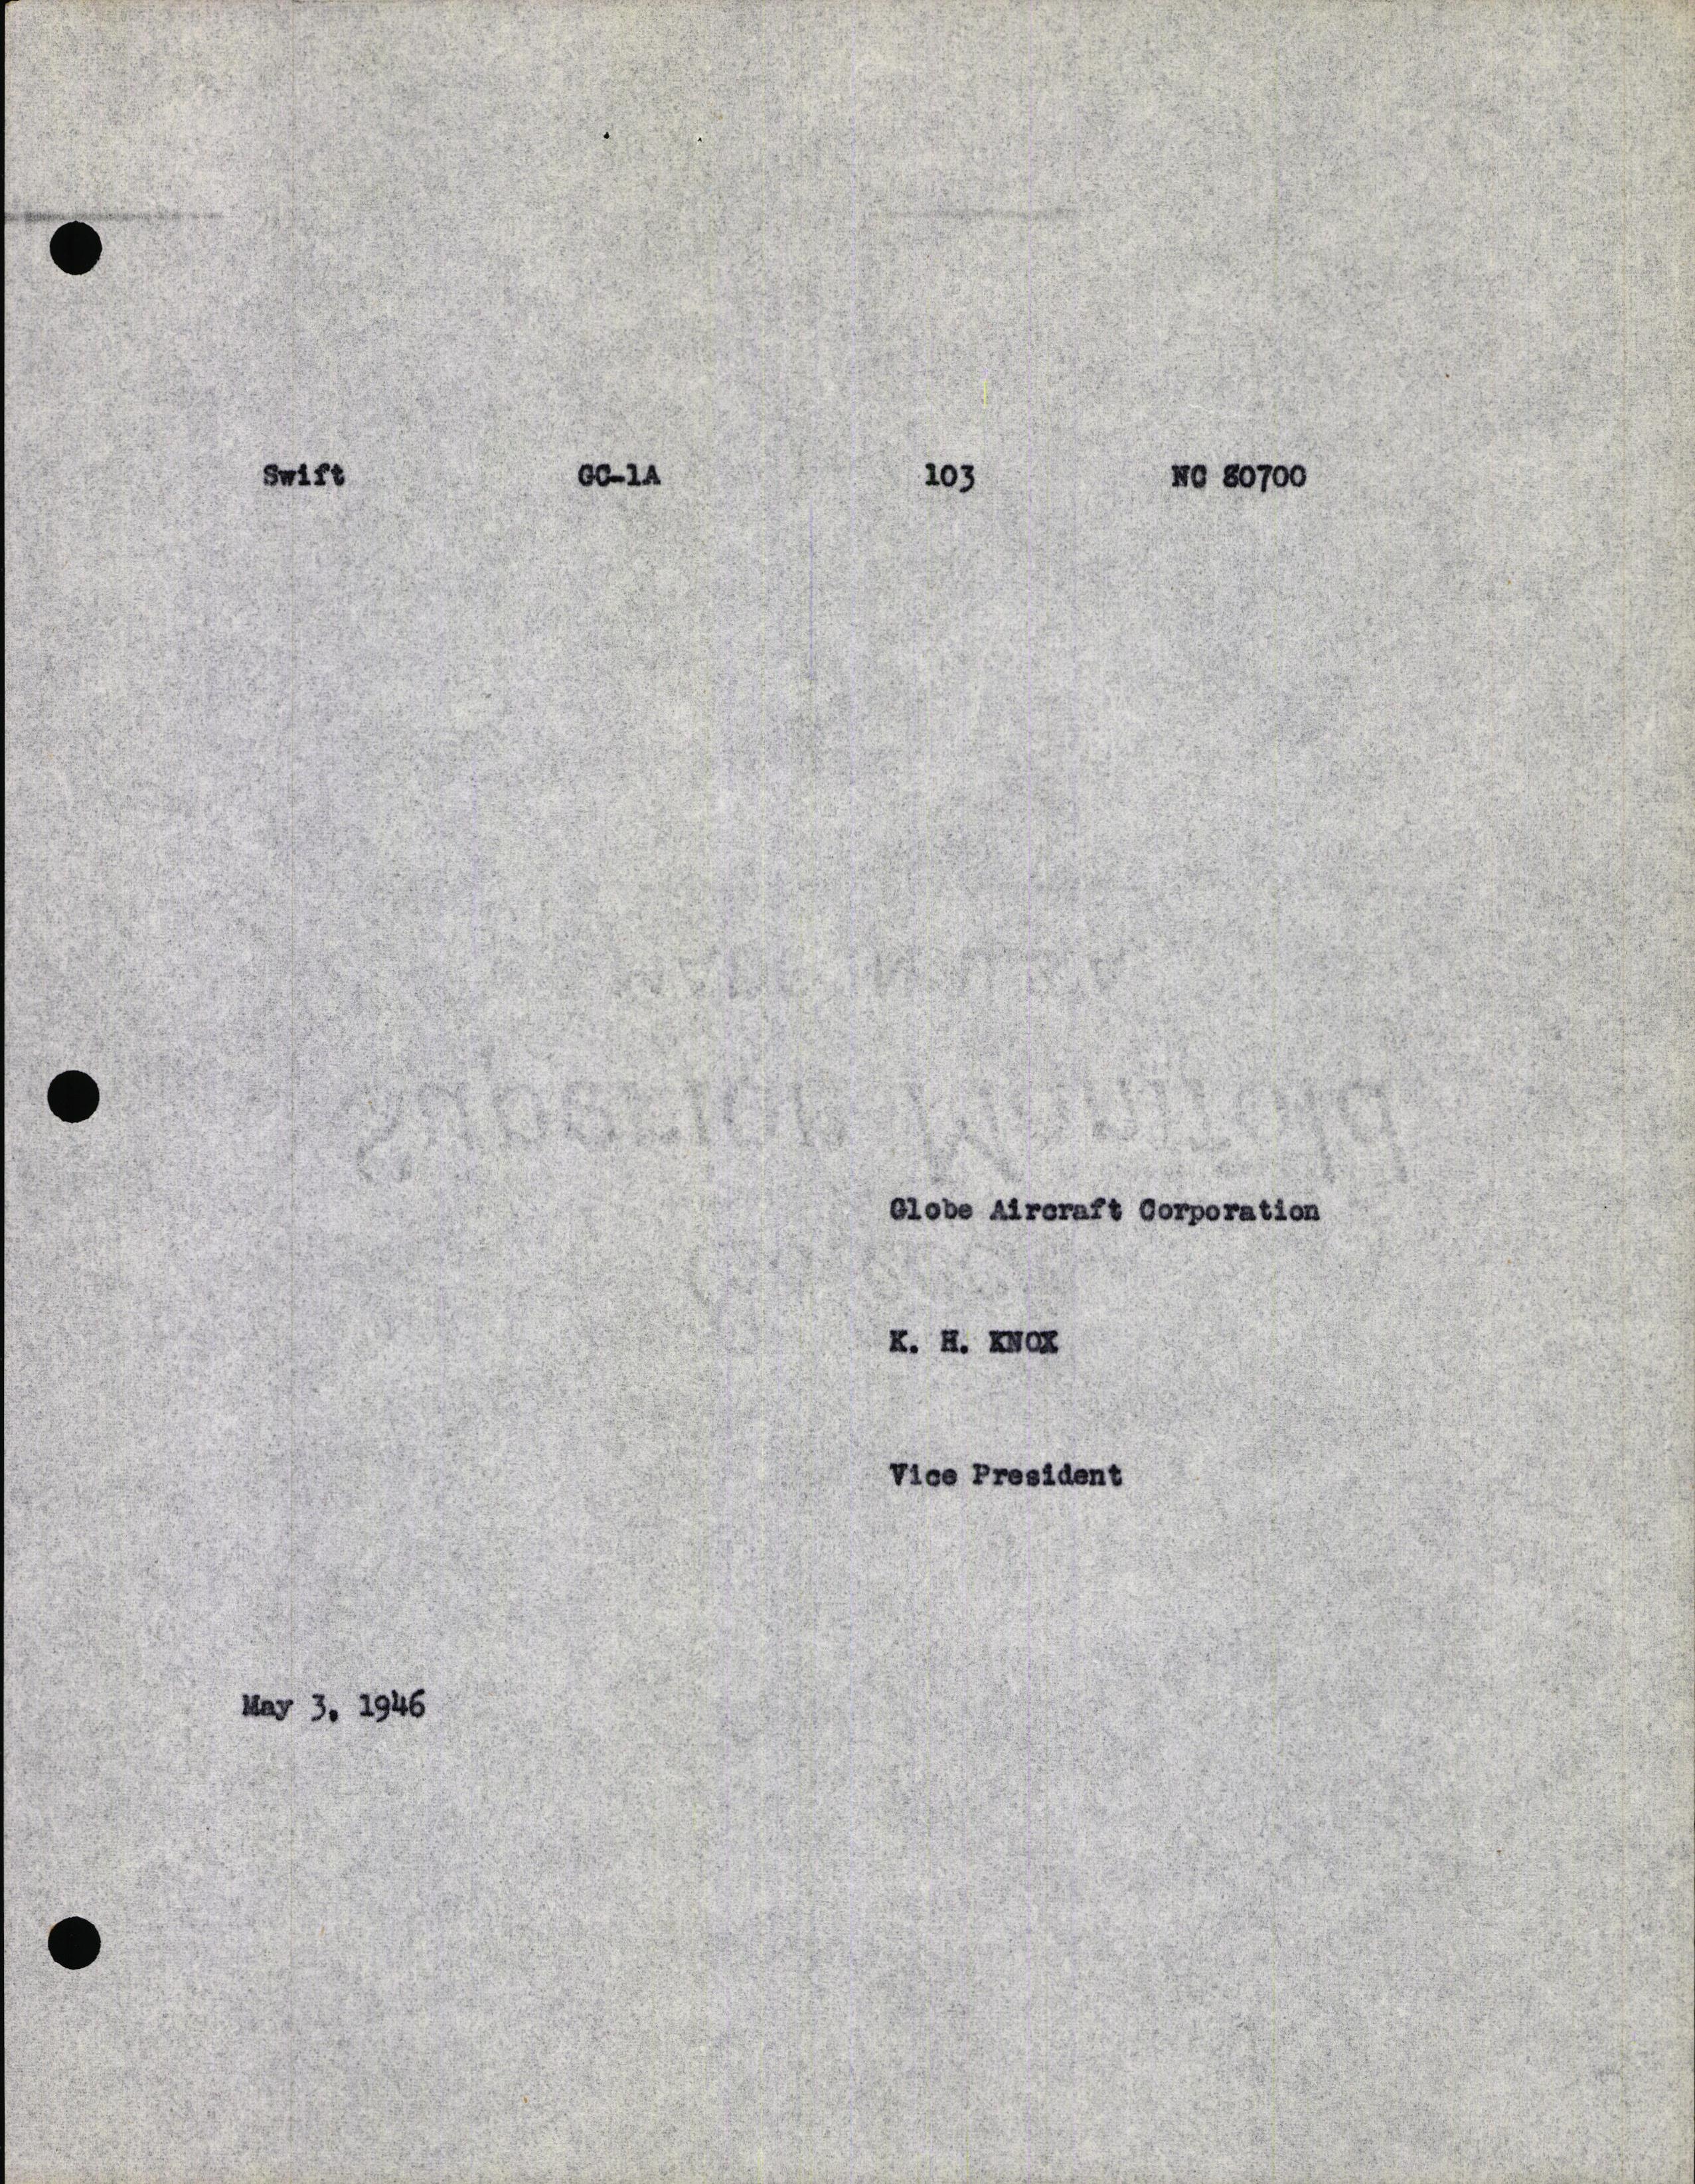 Sample page 11 from AirCorps Library document: Technical Information for Serial Number 103